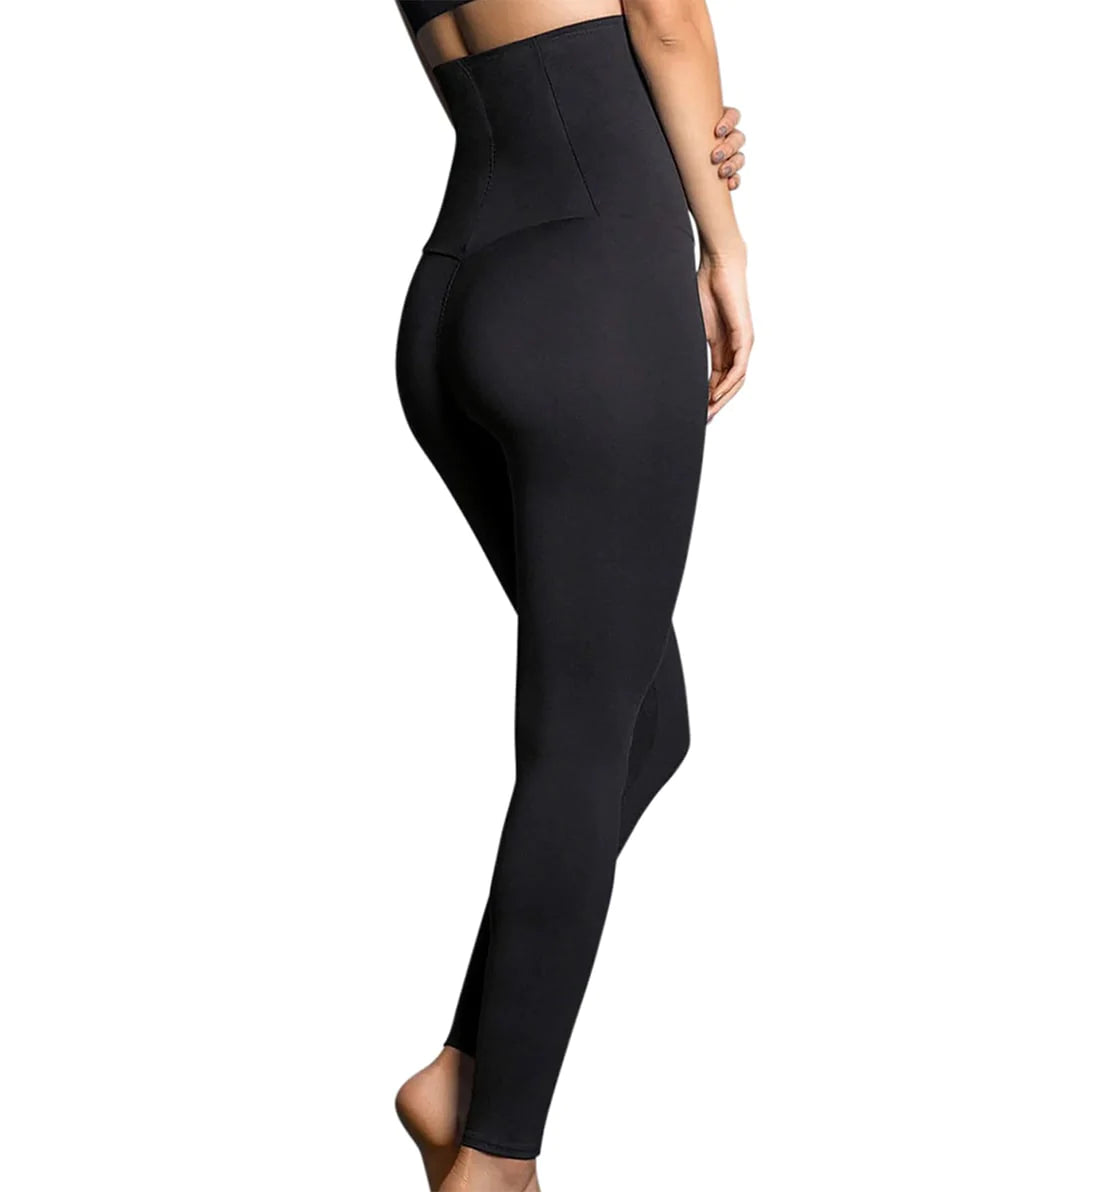 Leonisa Post Pregnancy High Waisted Firm Compression ActiveLife Leggings